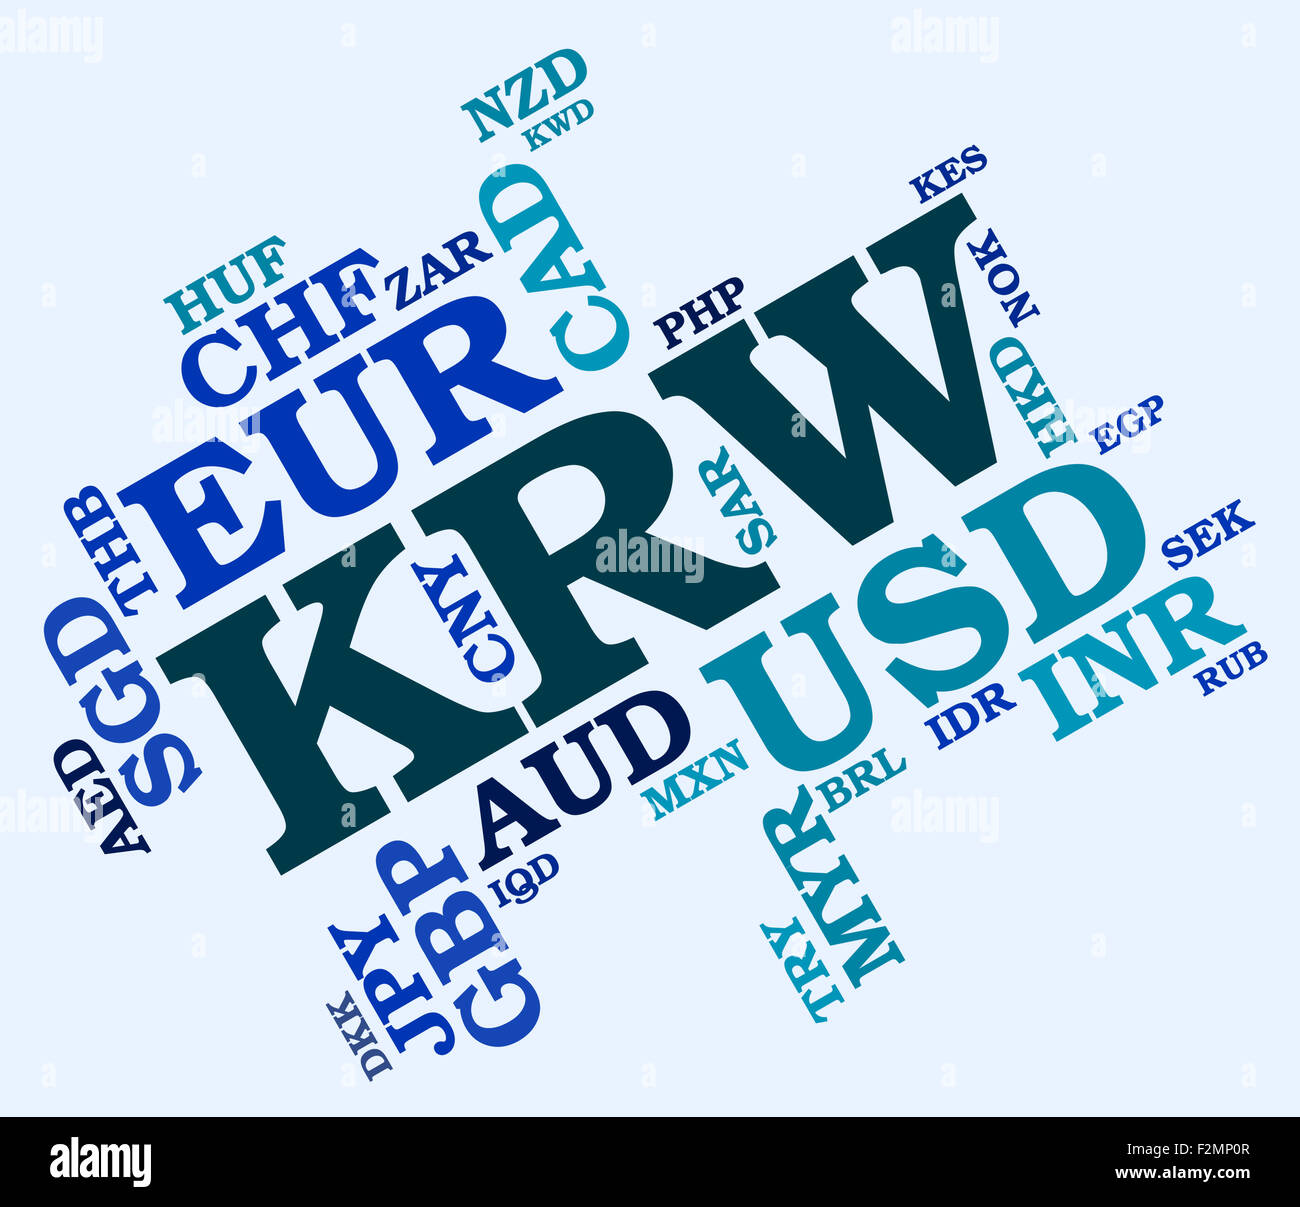 Krw Currency Meaning South Korean Wons And South Korean Won Stock Photo